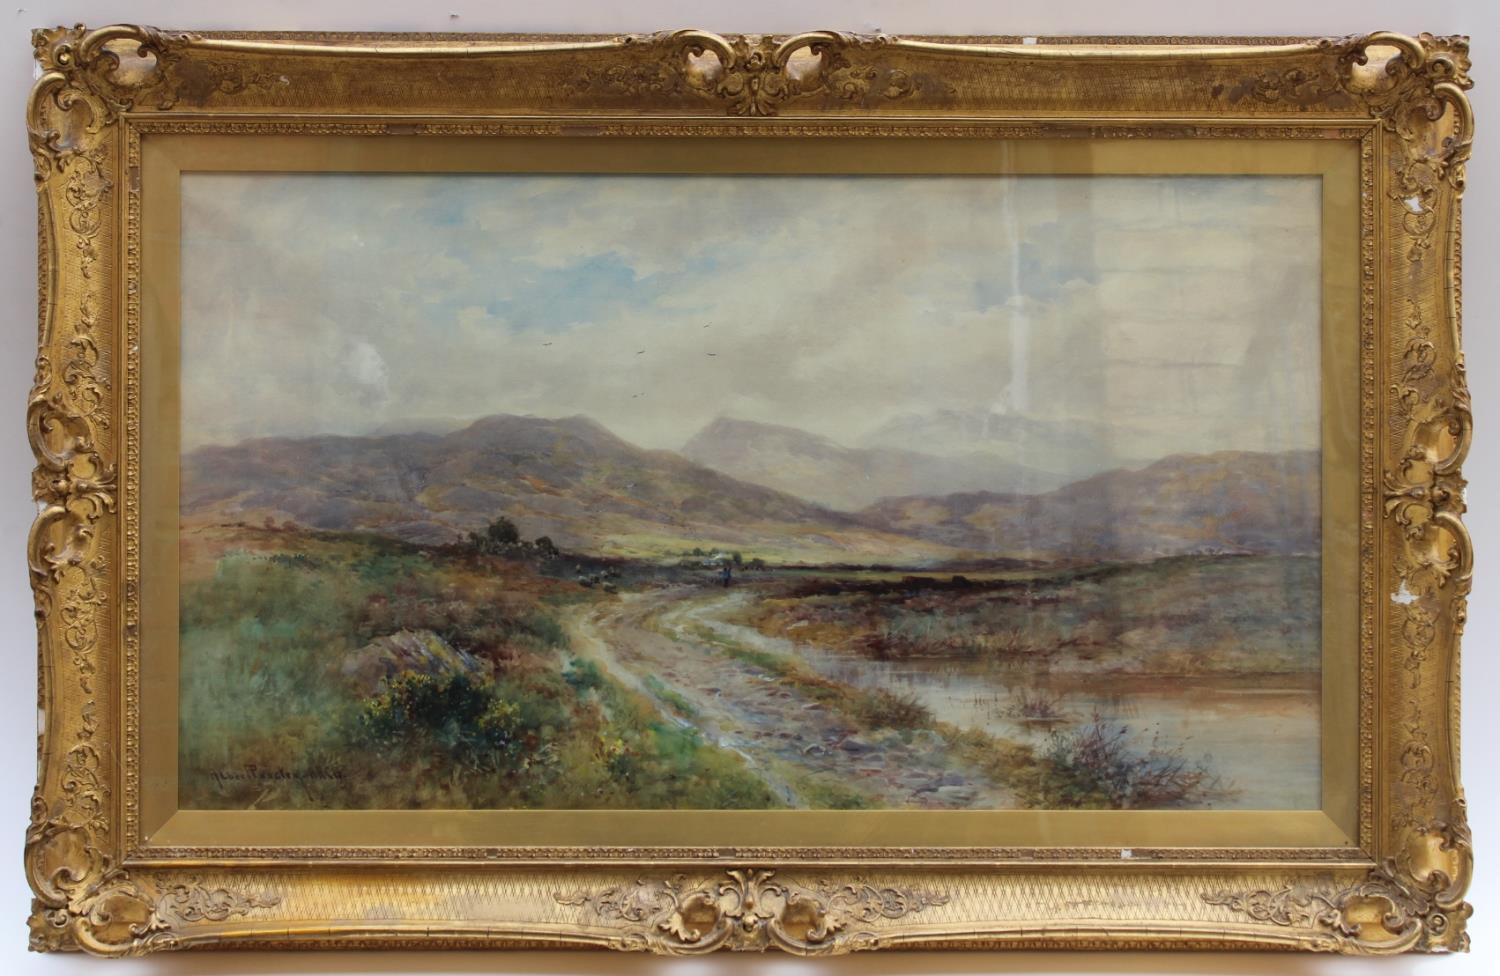 ALBERT PROCTER (Fl.1884-1905) THE DROVER'S PATH (BORROWDALE?) Signed, watercolour, period gilt frame - Image 2 of 2